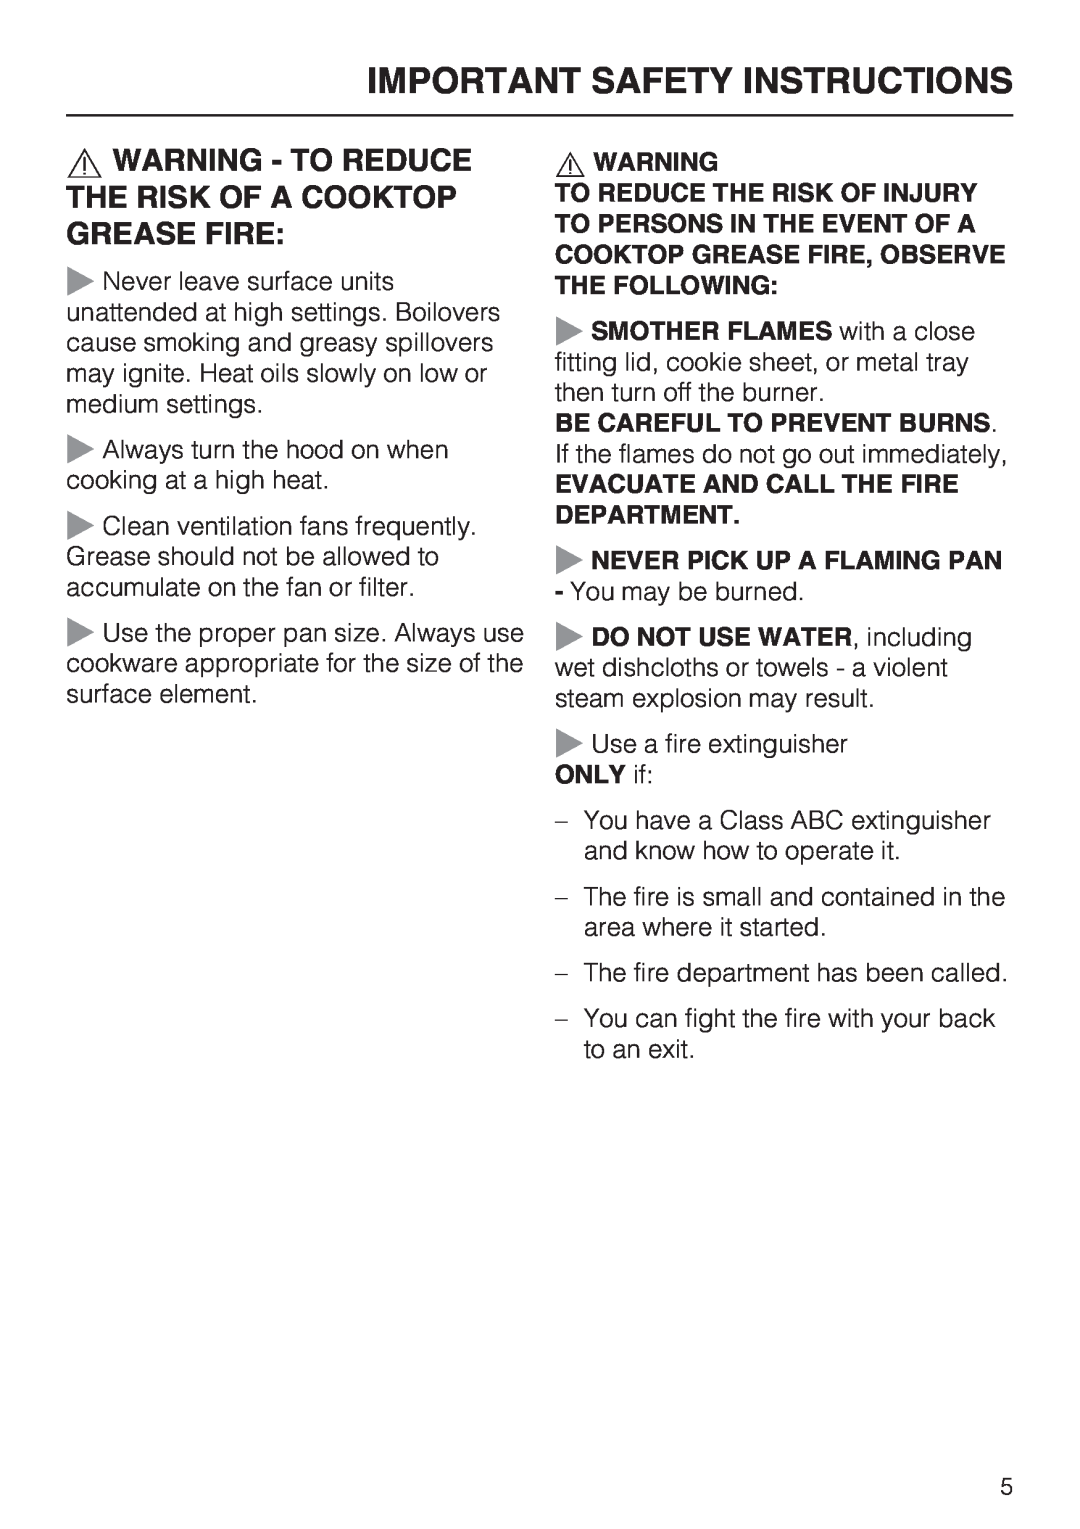 Miele DA409, DA408 installation instructions Important Safety Instructions, Evacuate And Call The Fire Department 